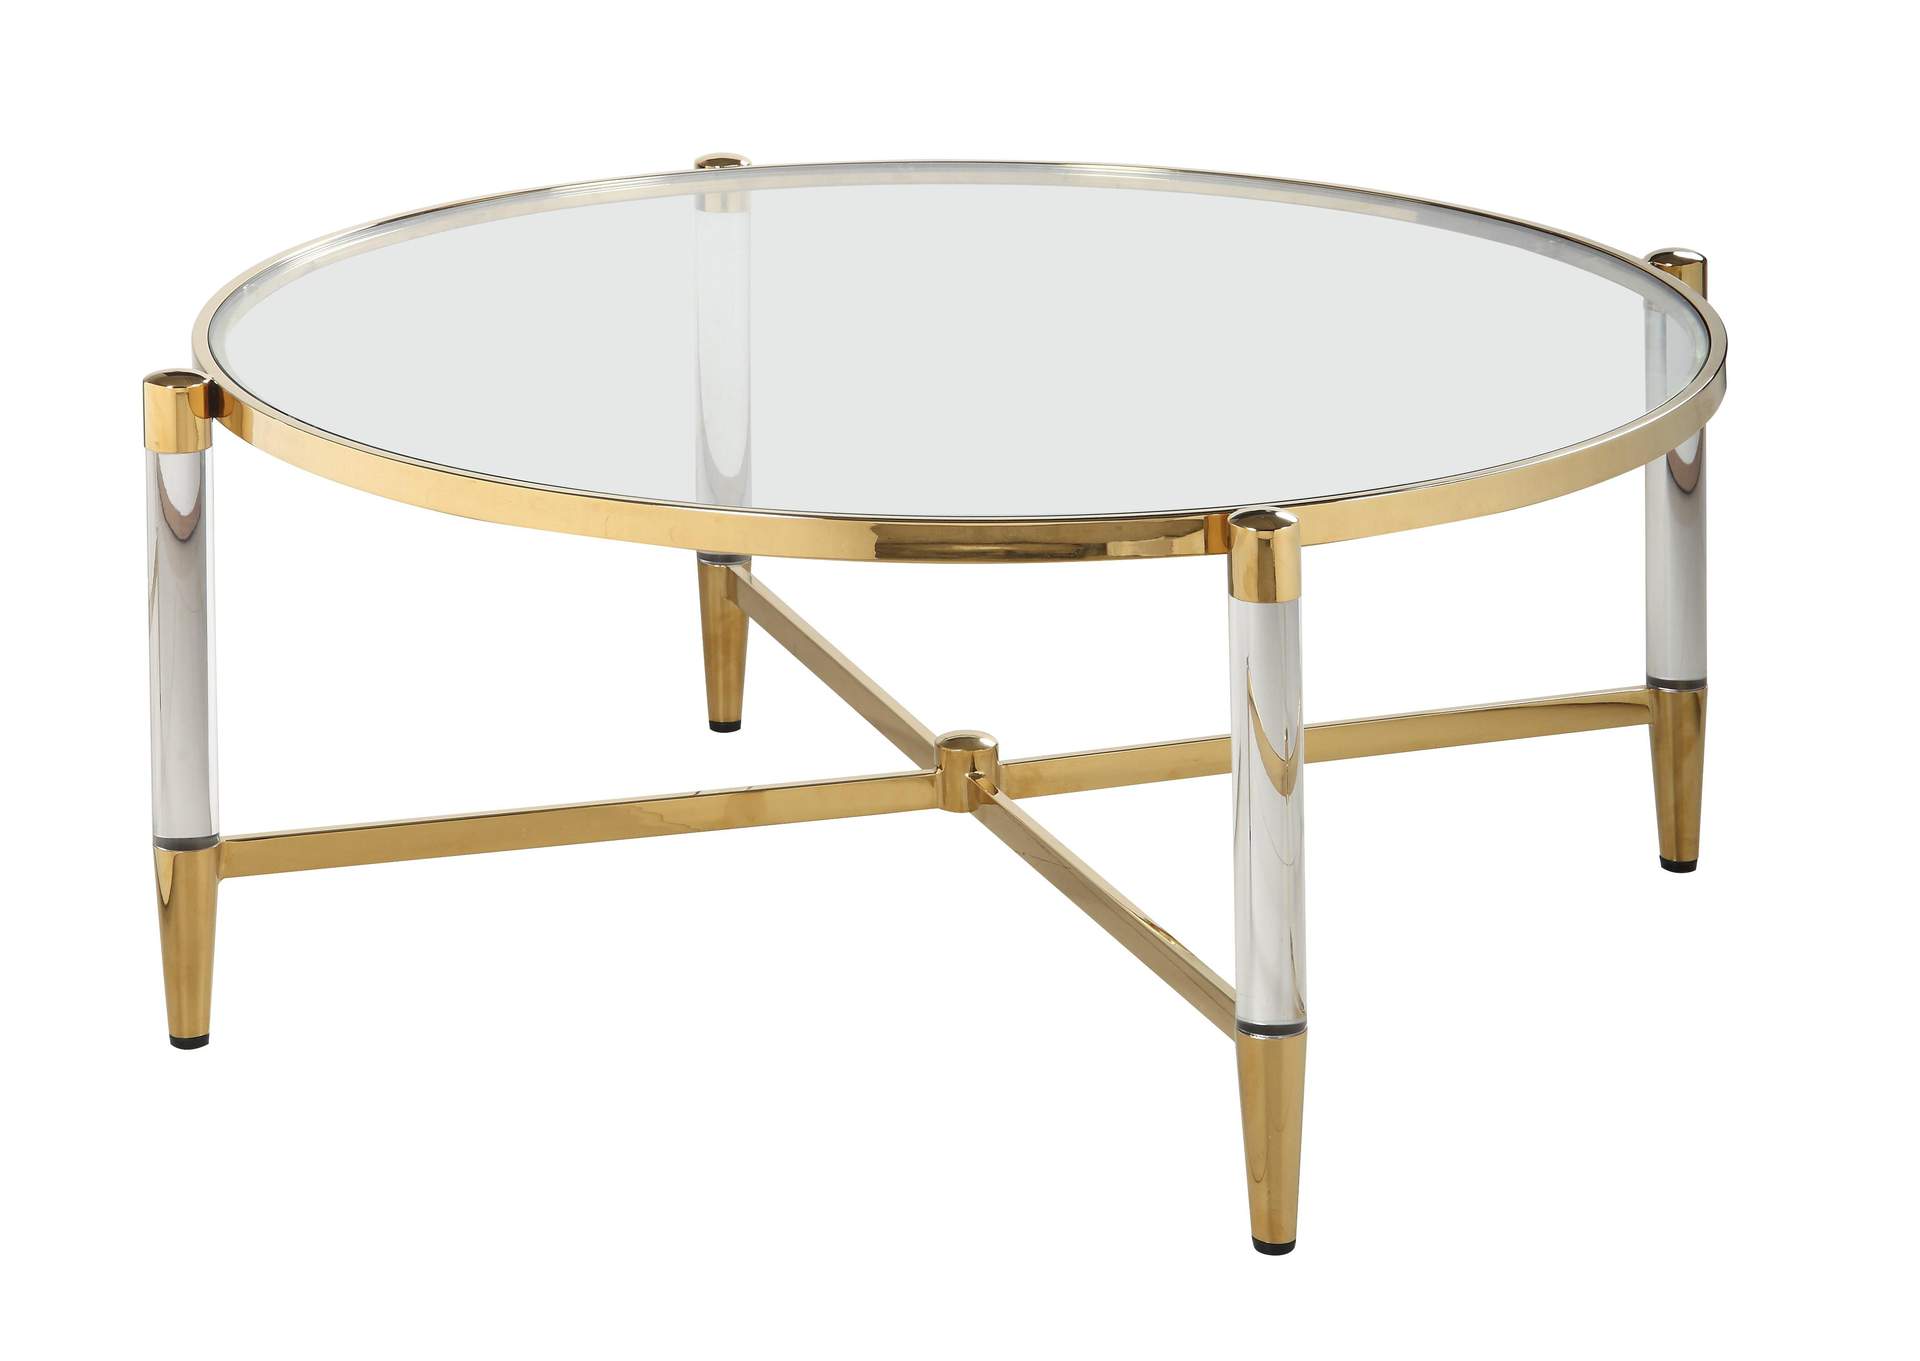 Denali Brass Round Tempered Glass Cocktail Table,Chintaly Imports